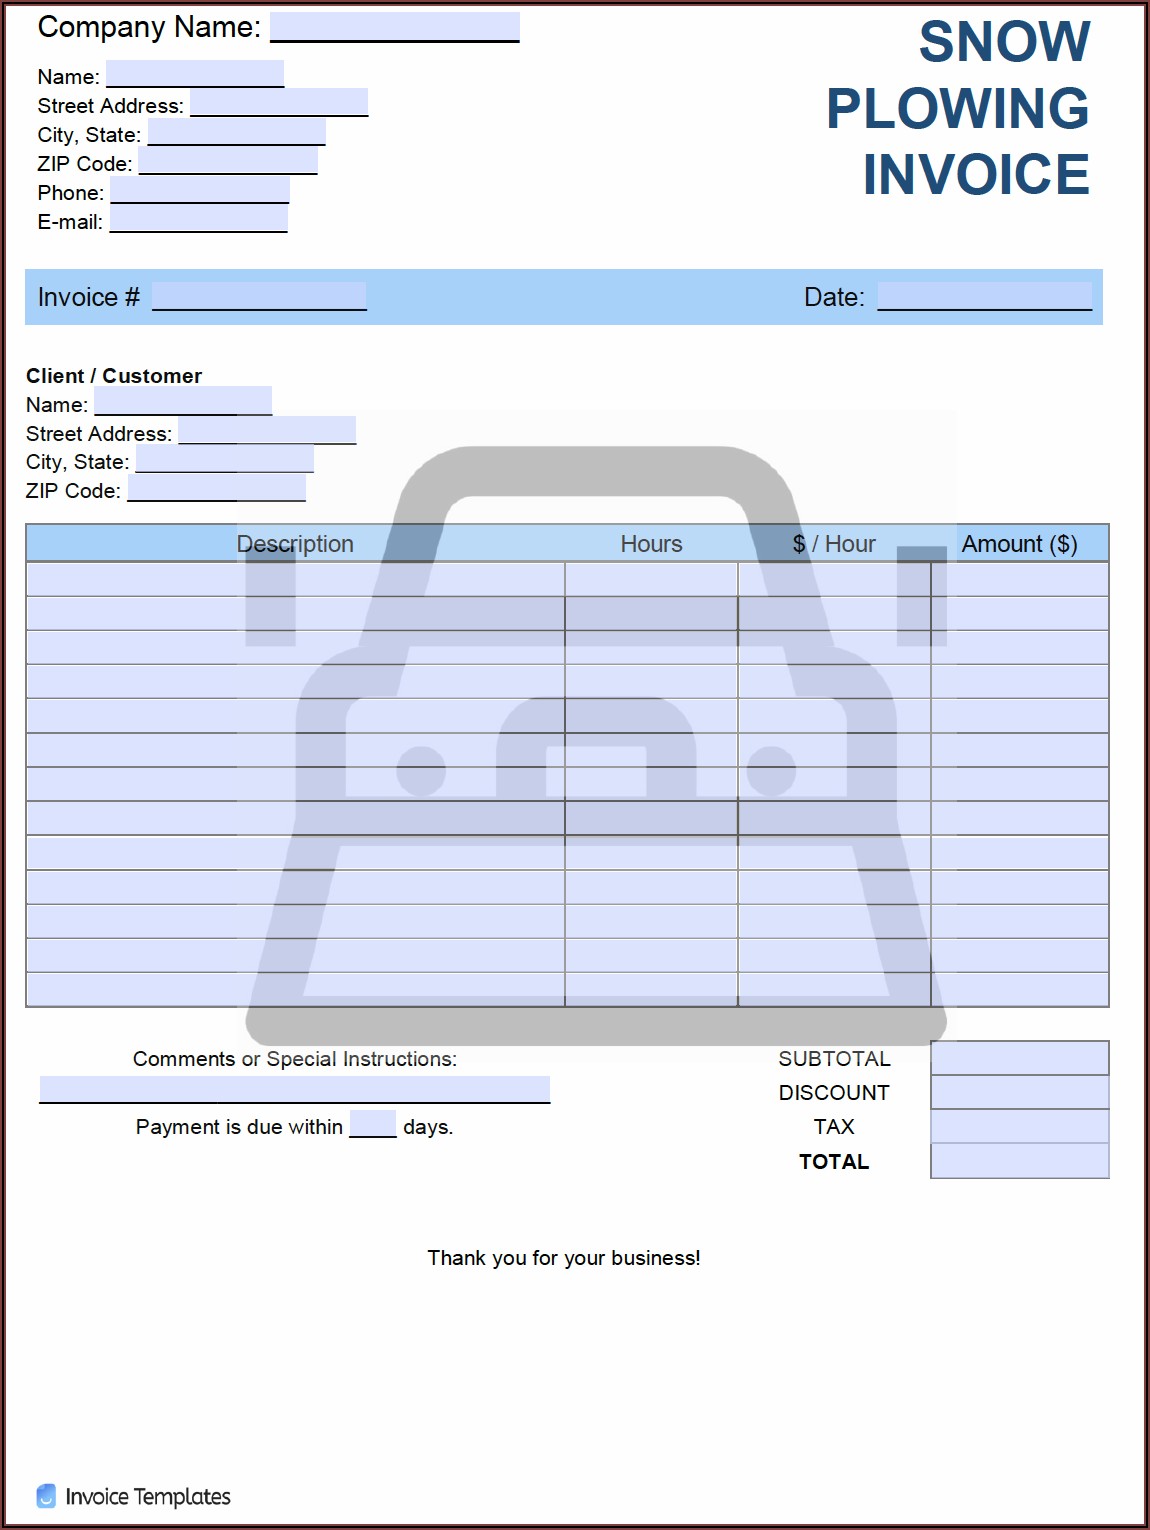 snow-plowing-invoice-template-template-1-resume-examples-ykvbbeqlvm